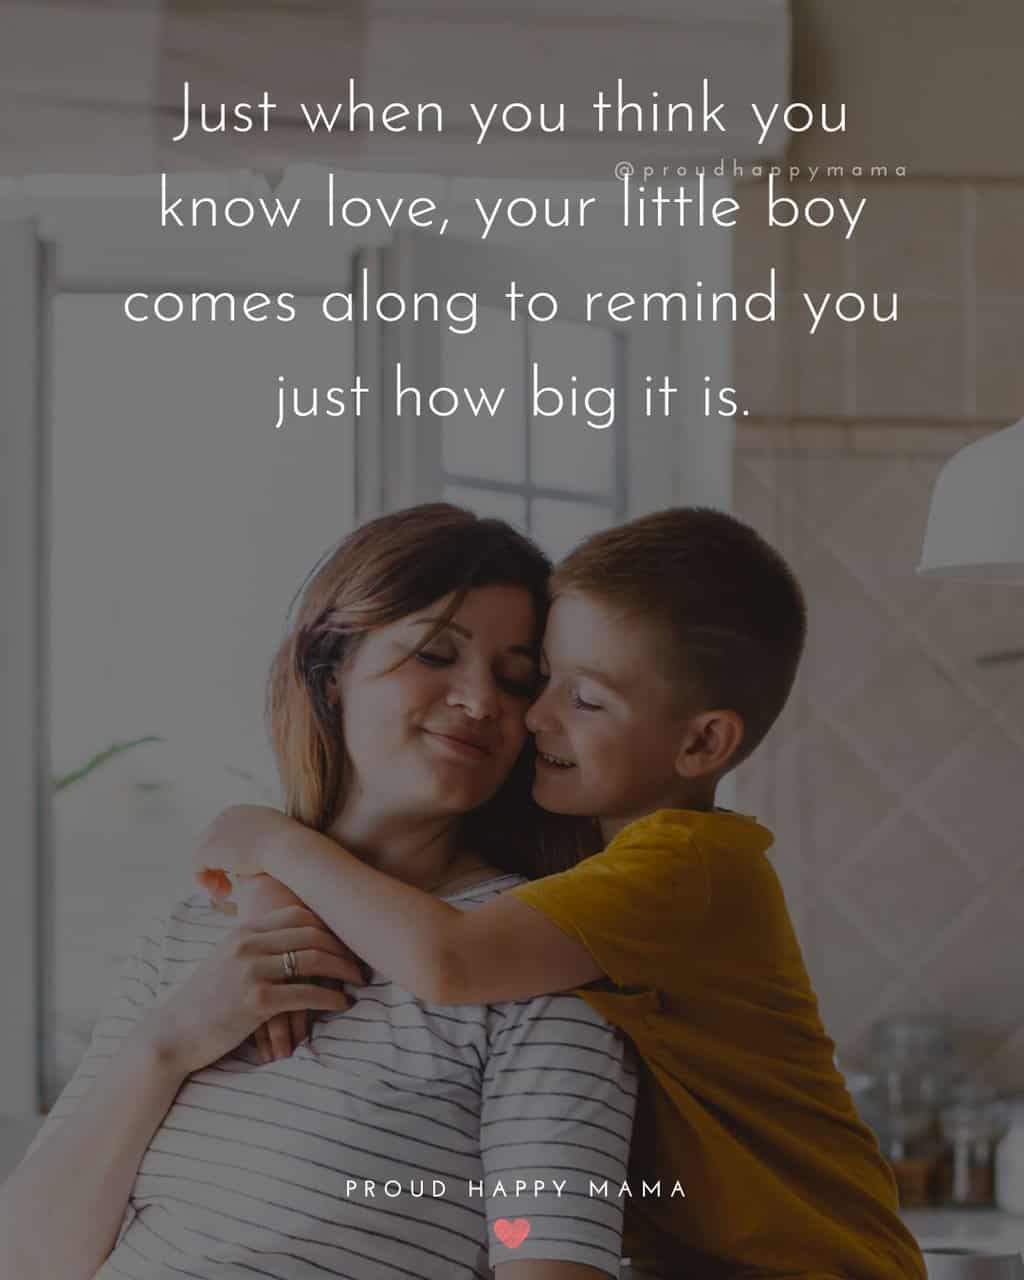 Little boy quotes from mommy - 29. ‘Just when you think you know love, your little boy comes along to remind you just how big it is.’